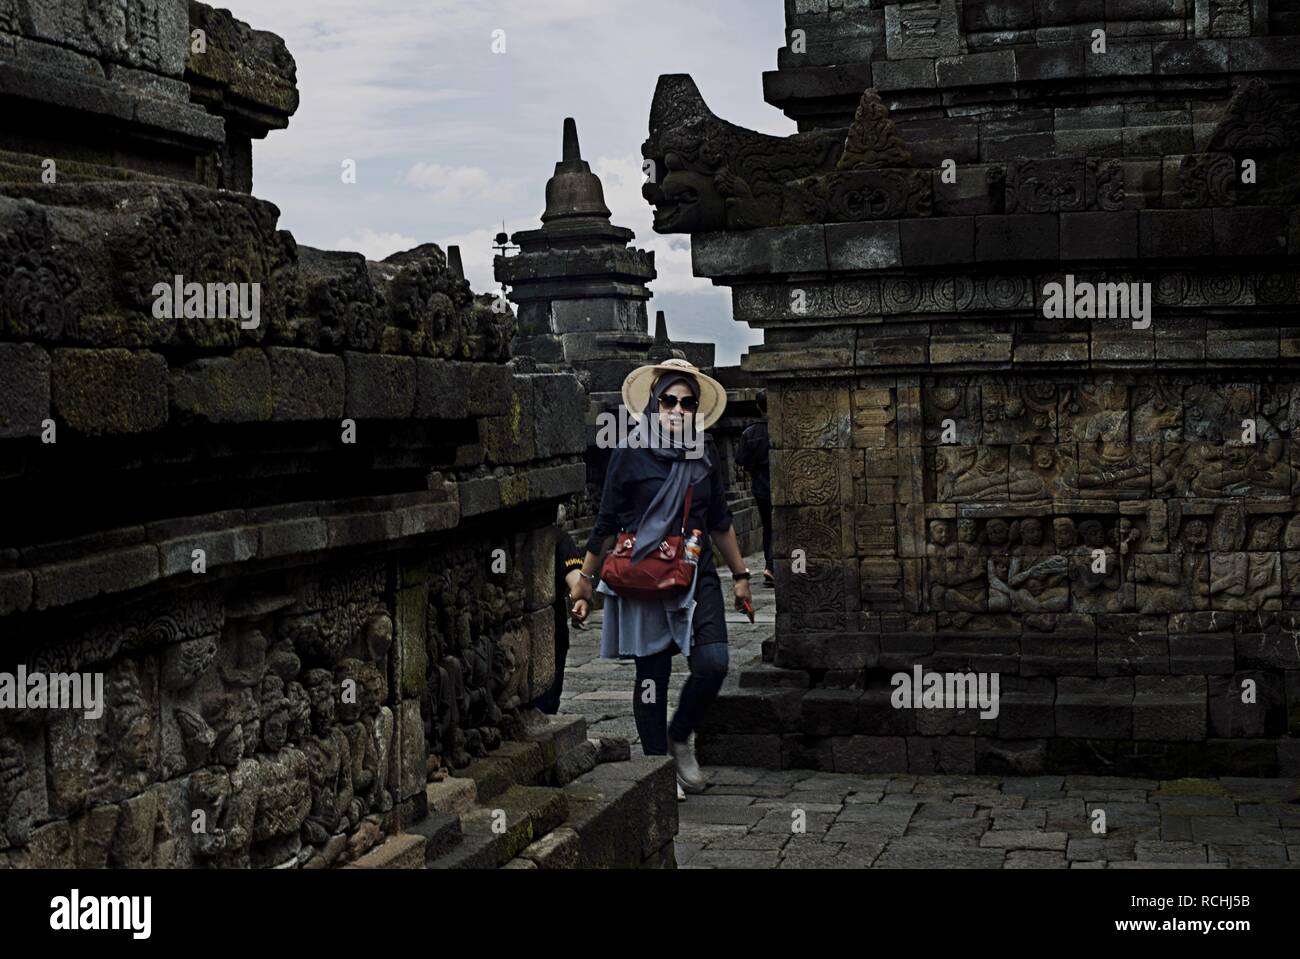 Tourist at Borobudur Temple in Central Java province of Indonesia. Stock Photo